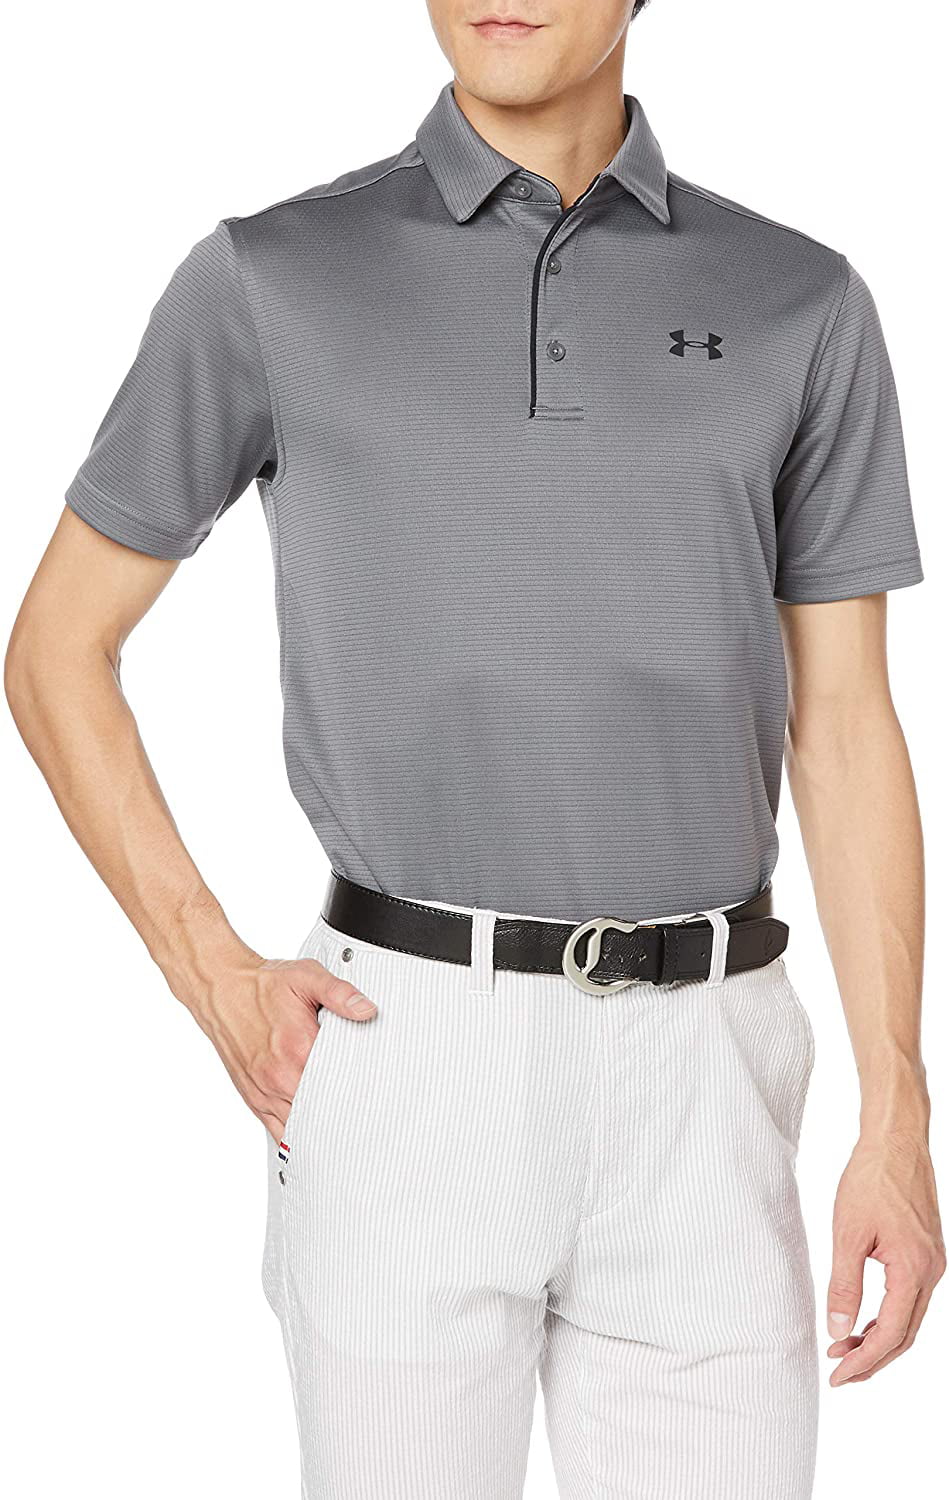 Under Armour Men's Elevated Polo GRAPHITEWHITE SM 